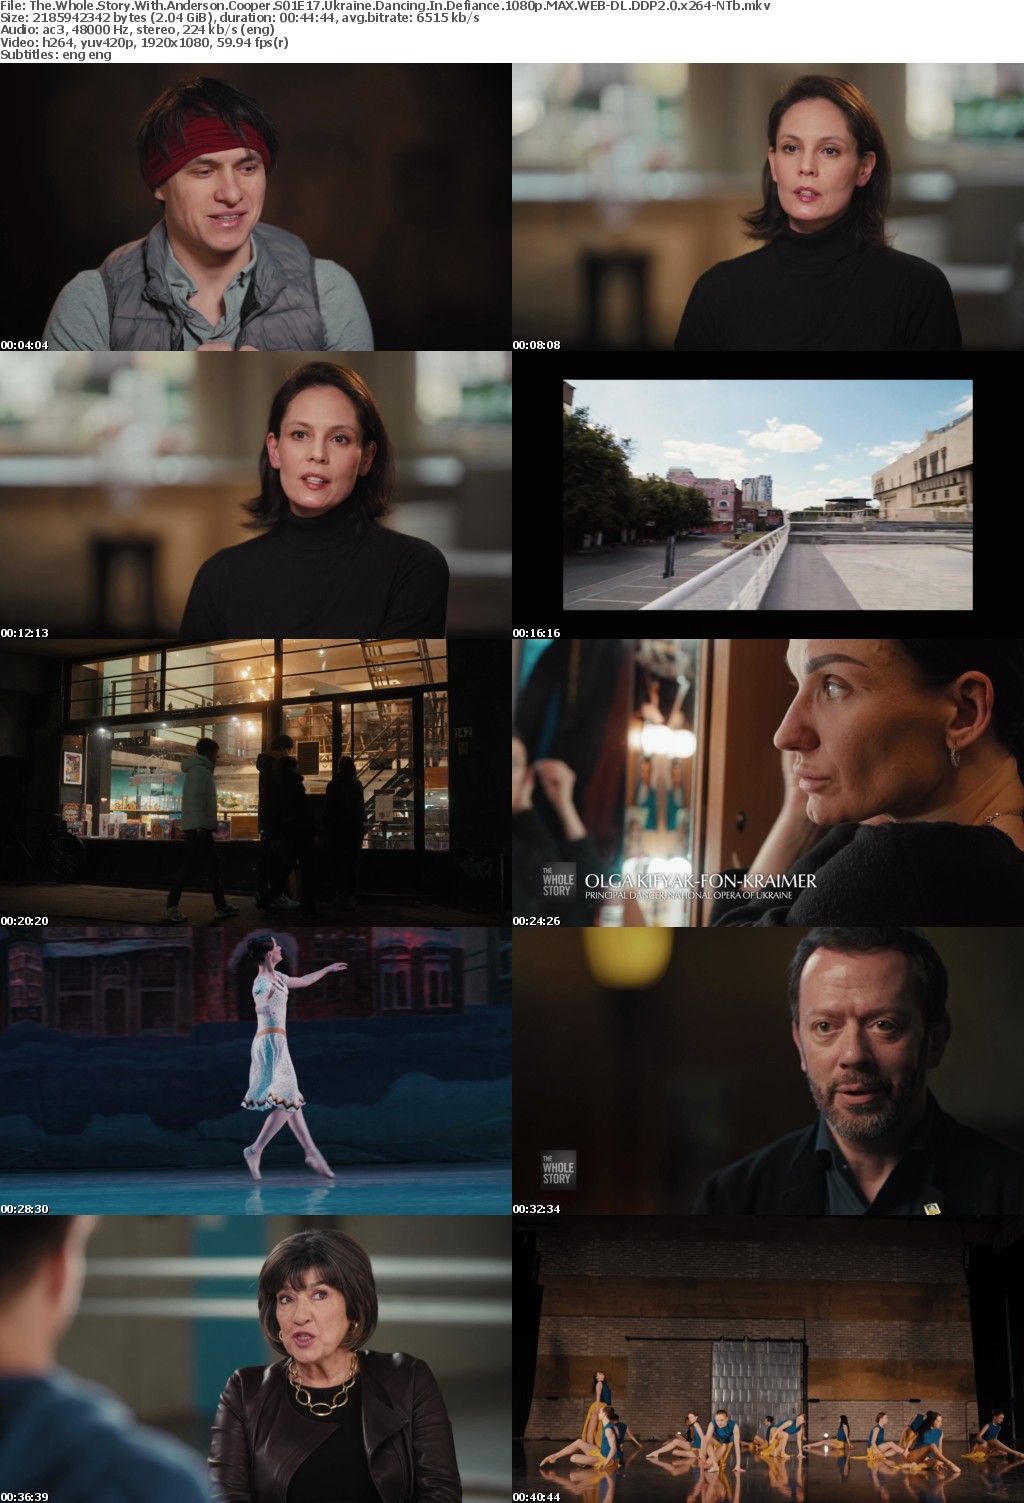 The Whole Story With Anderson Cooper S01E17 Ukraine Dancing In Defiance 1080p MAX WEB-DL DDP2 0 x264-NTb